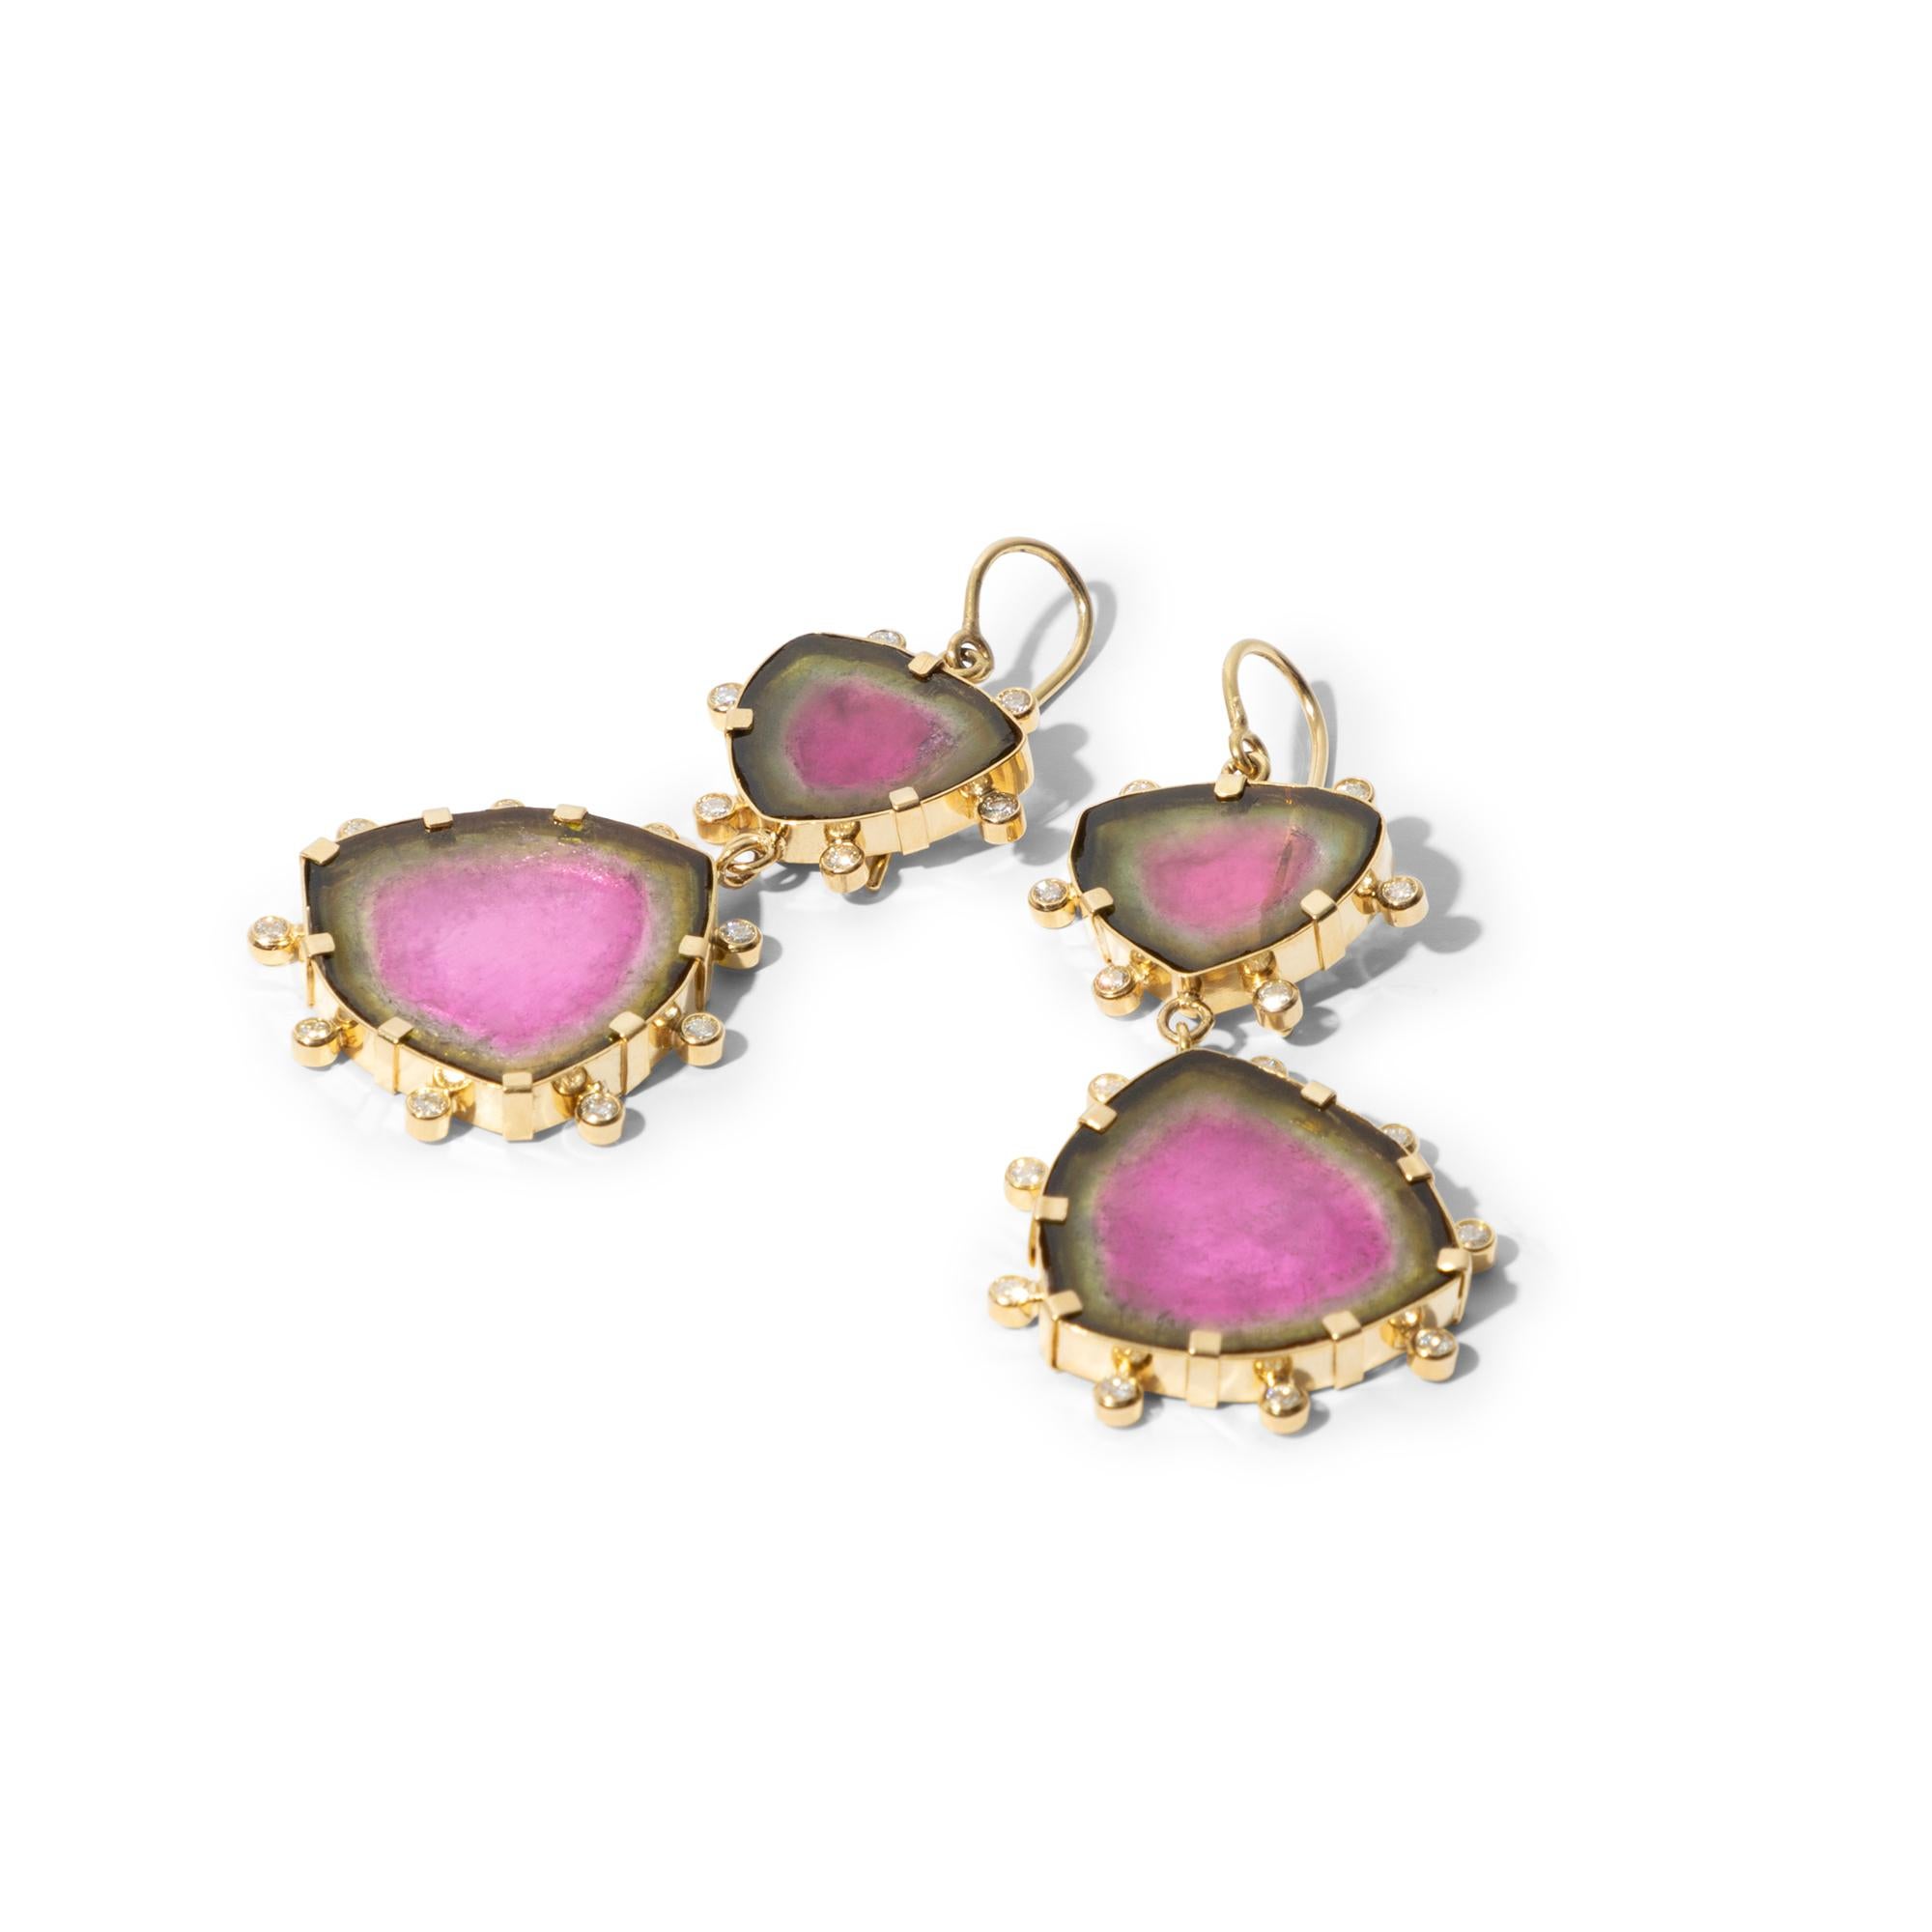 Make an entrance with this extraordinary pair of statement earrings consisting of four sumptuous slices of watermelon tourmaline in the most vibrant pink and green. A fine example of luxurious sophistication. The tourmalines have a total weight of